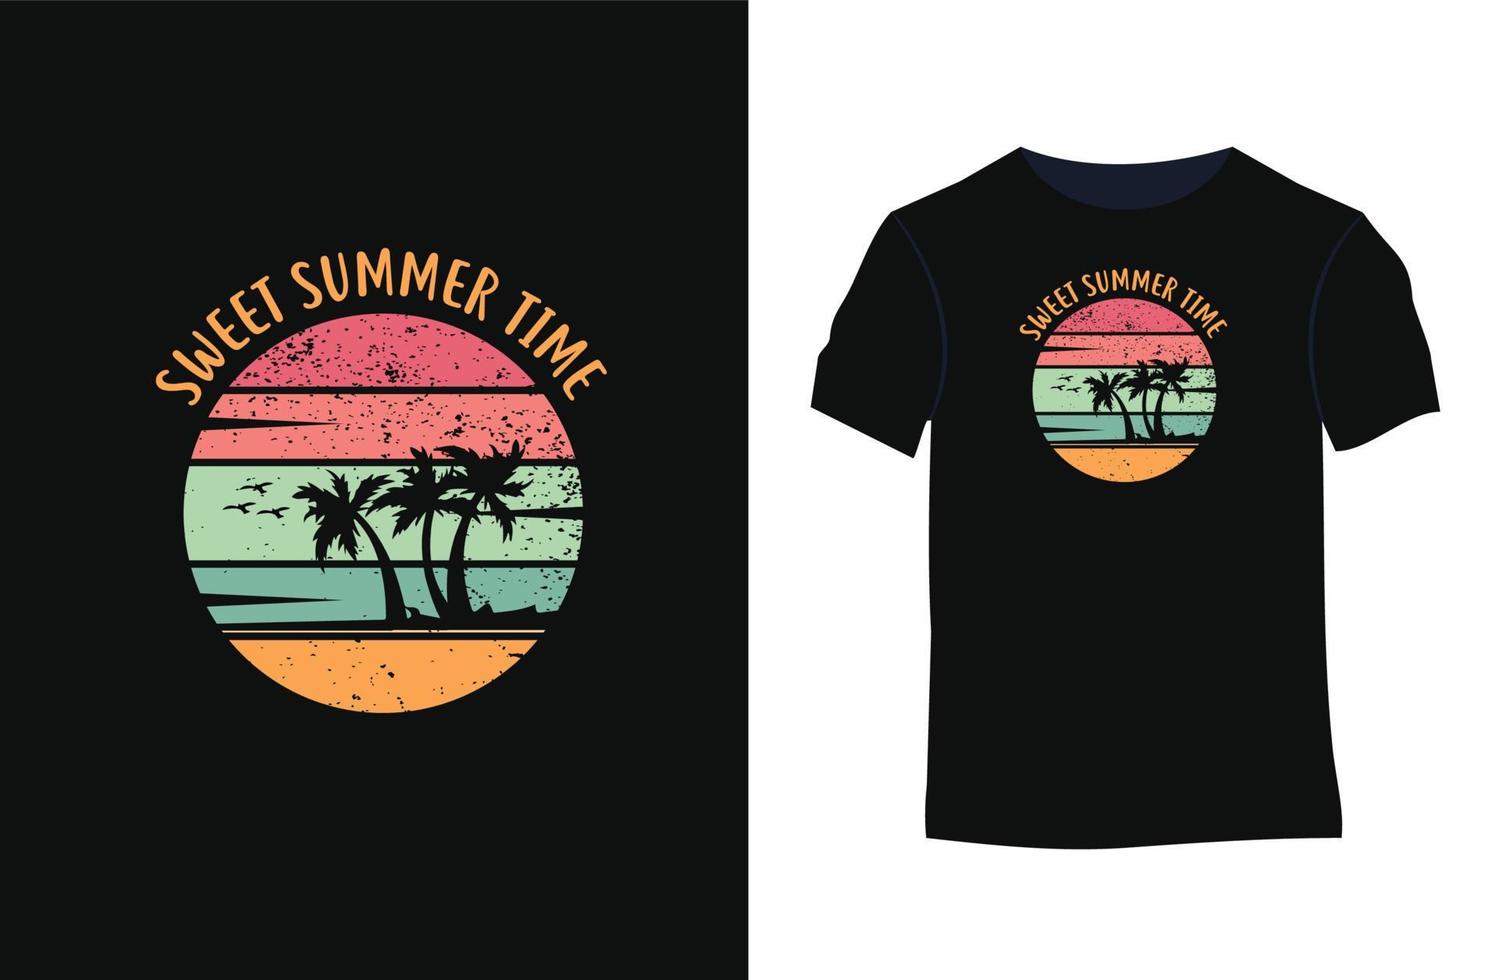 Summer stylish t-shirt design with silhouettes, typography, print, vector illustration